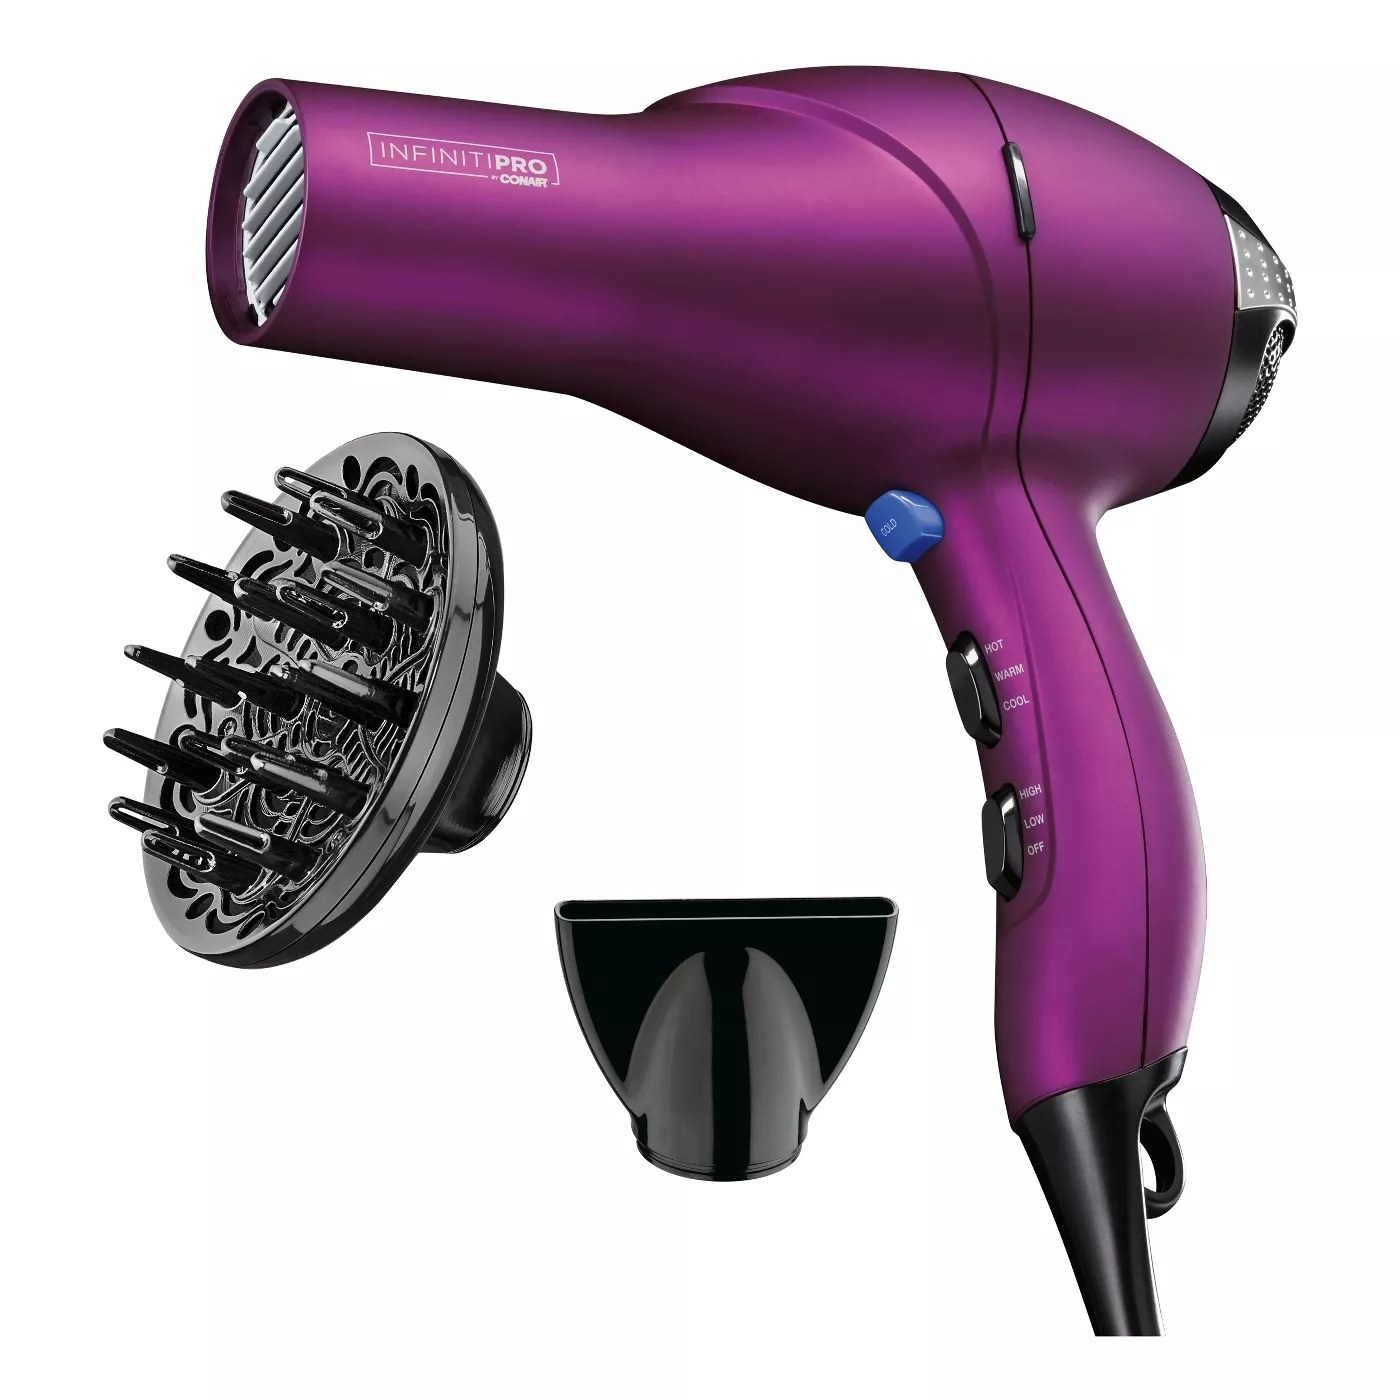 The hairdryer with two separate attachments — concentrator and diffuser